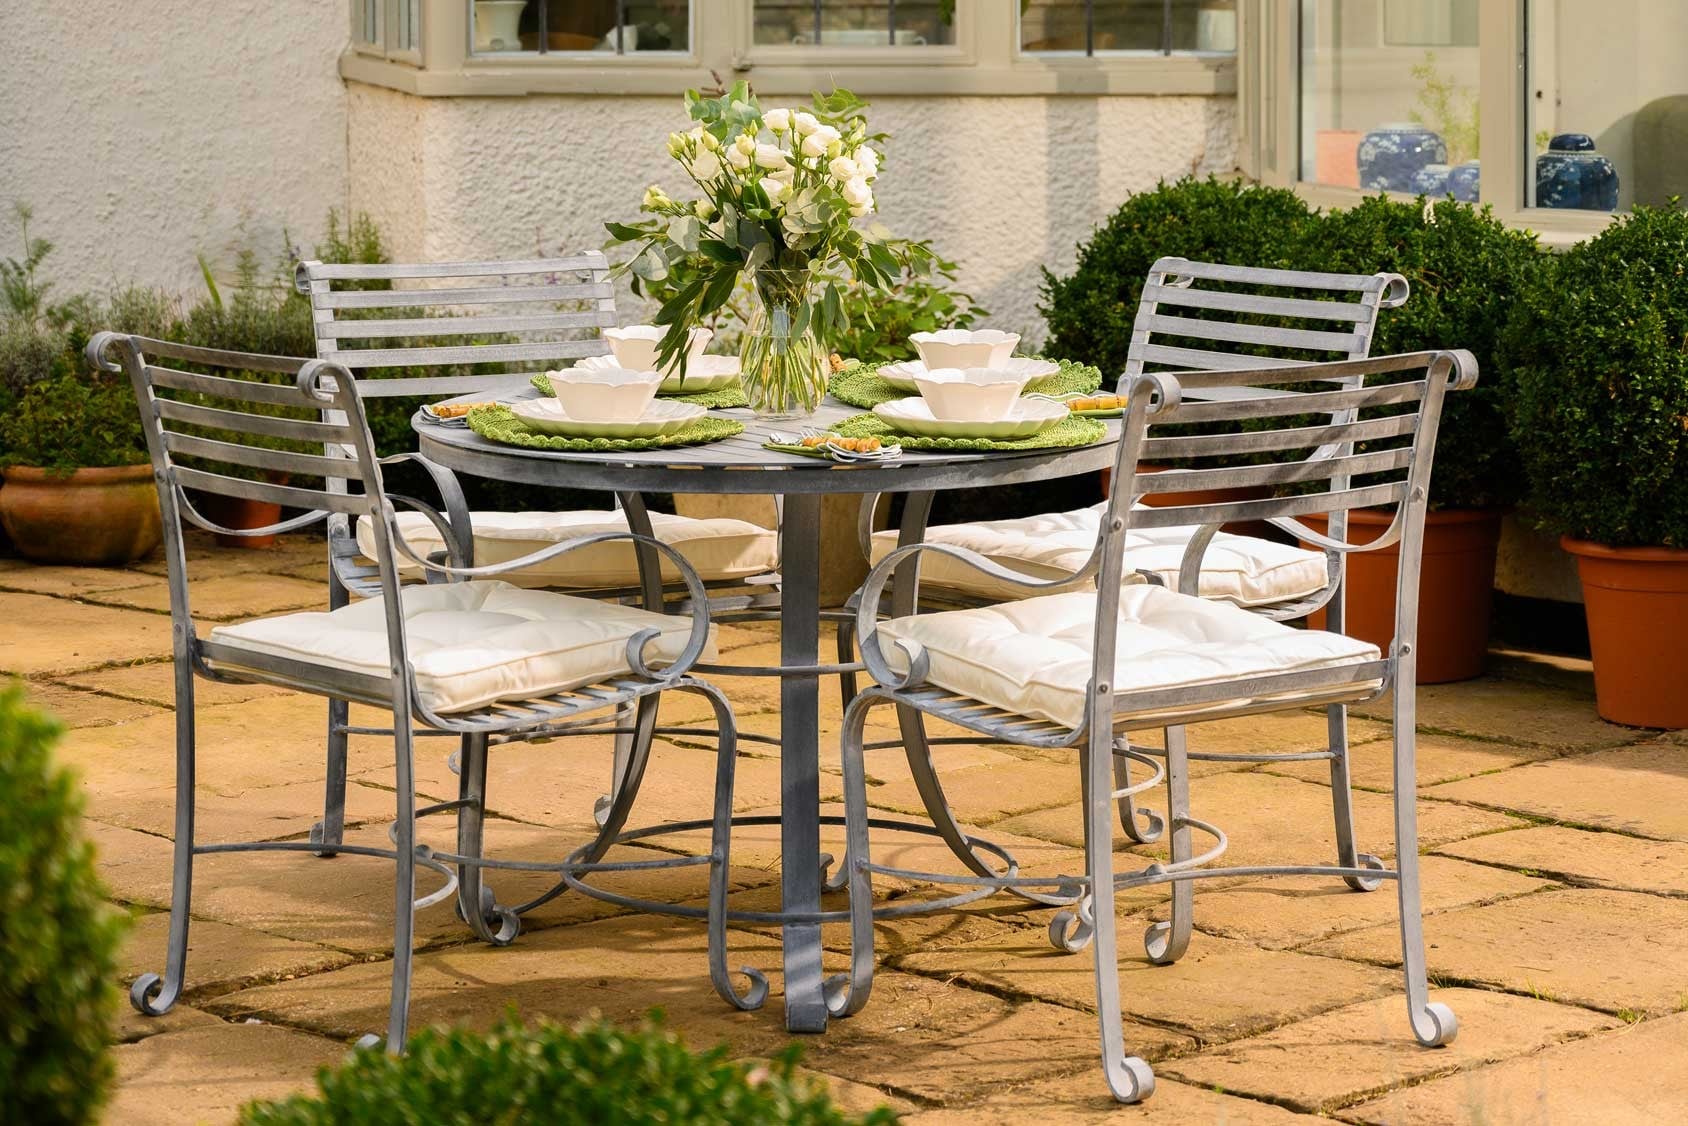 Luxury Handcrafted Round Outdoor Dining Set - 1m - 4 Seater - The Southwold Collection by Harrod Horticultural